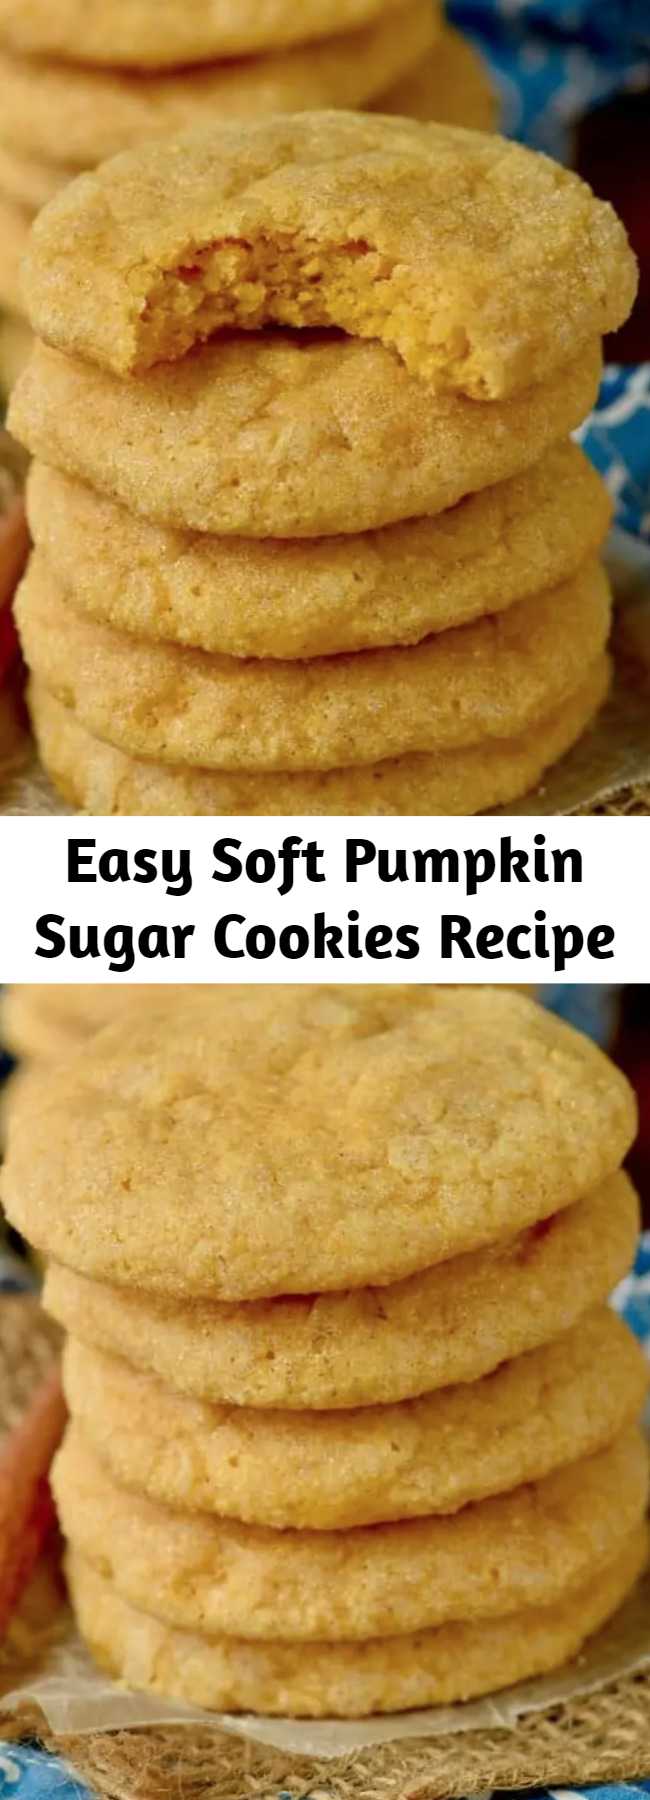 Easy Soft Pumpkin Sugar Cookies Recipe - Pumpkin Sugar Cookies are absolutely amazing! Deliciously soft sugar cookies, full of pumpkin fall flavor! This easy pumpkin cookies recipe is bound to become a family favorite!